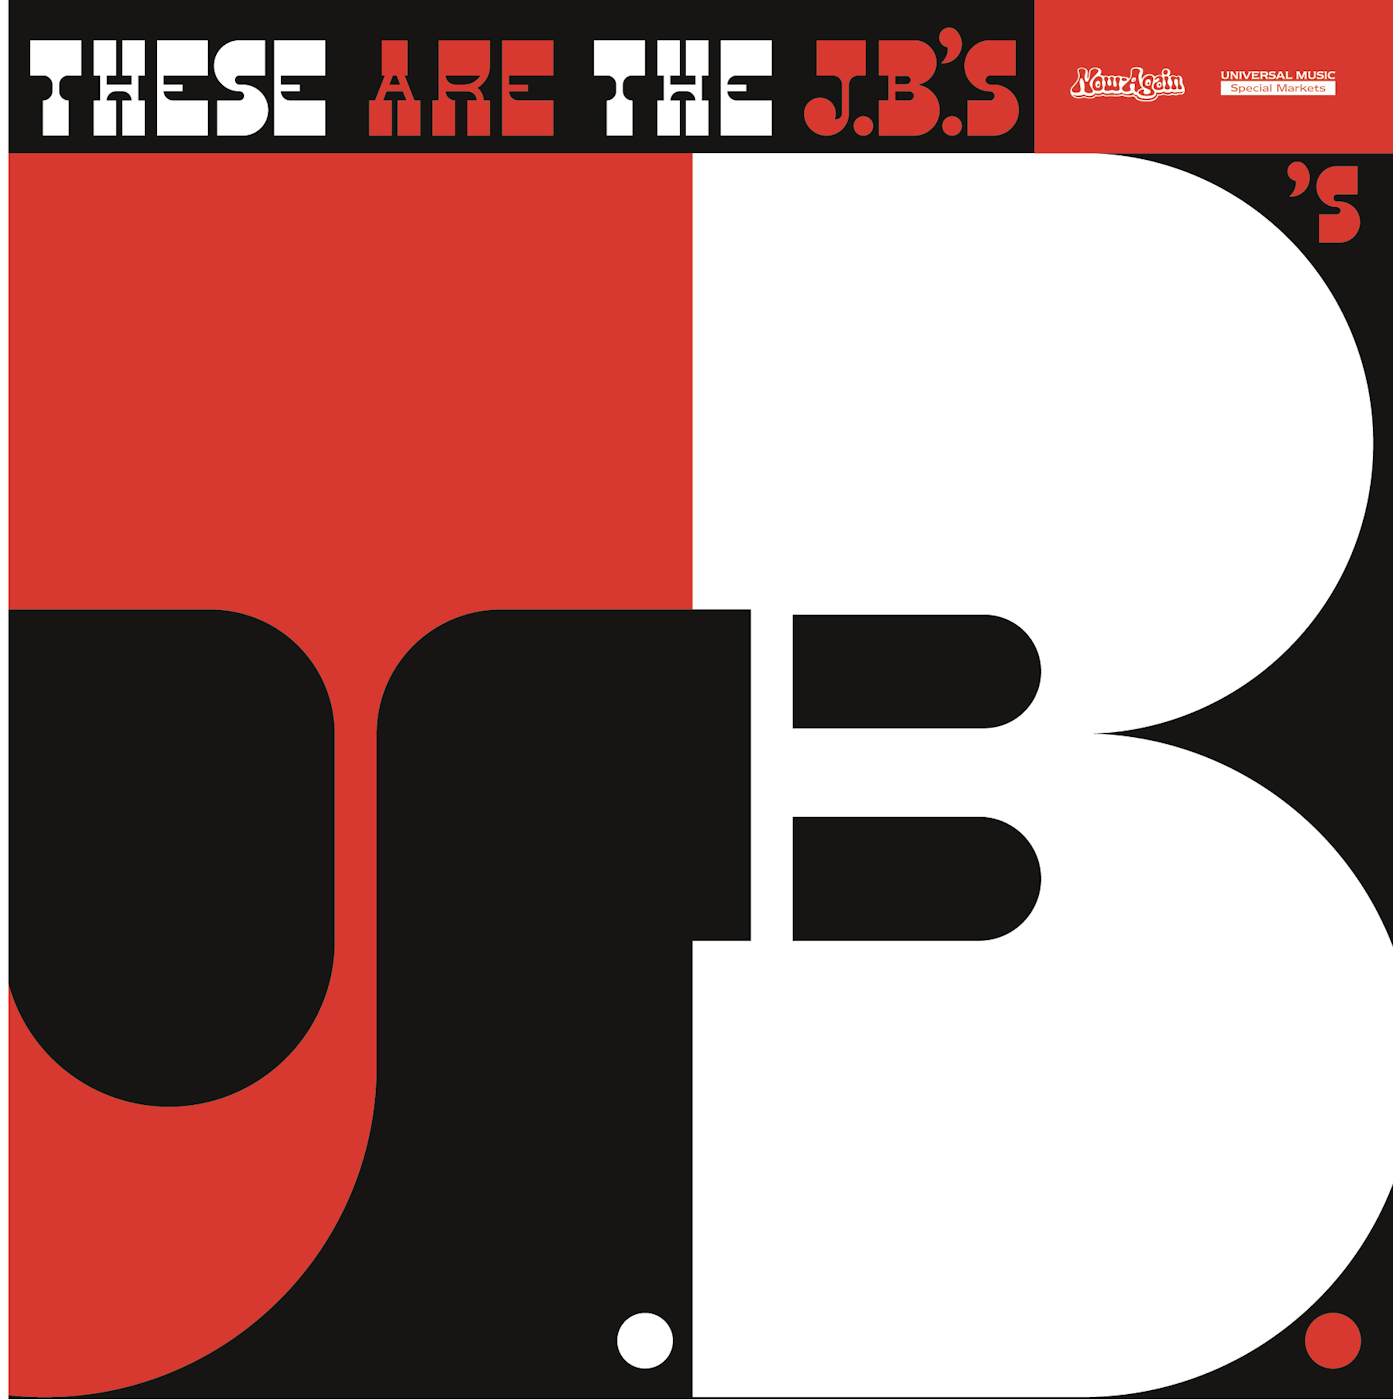 THESE ARE THE The J.B.'s Vinyl Record